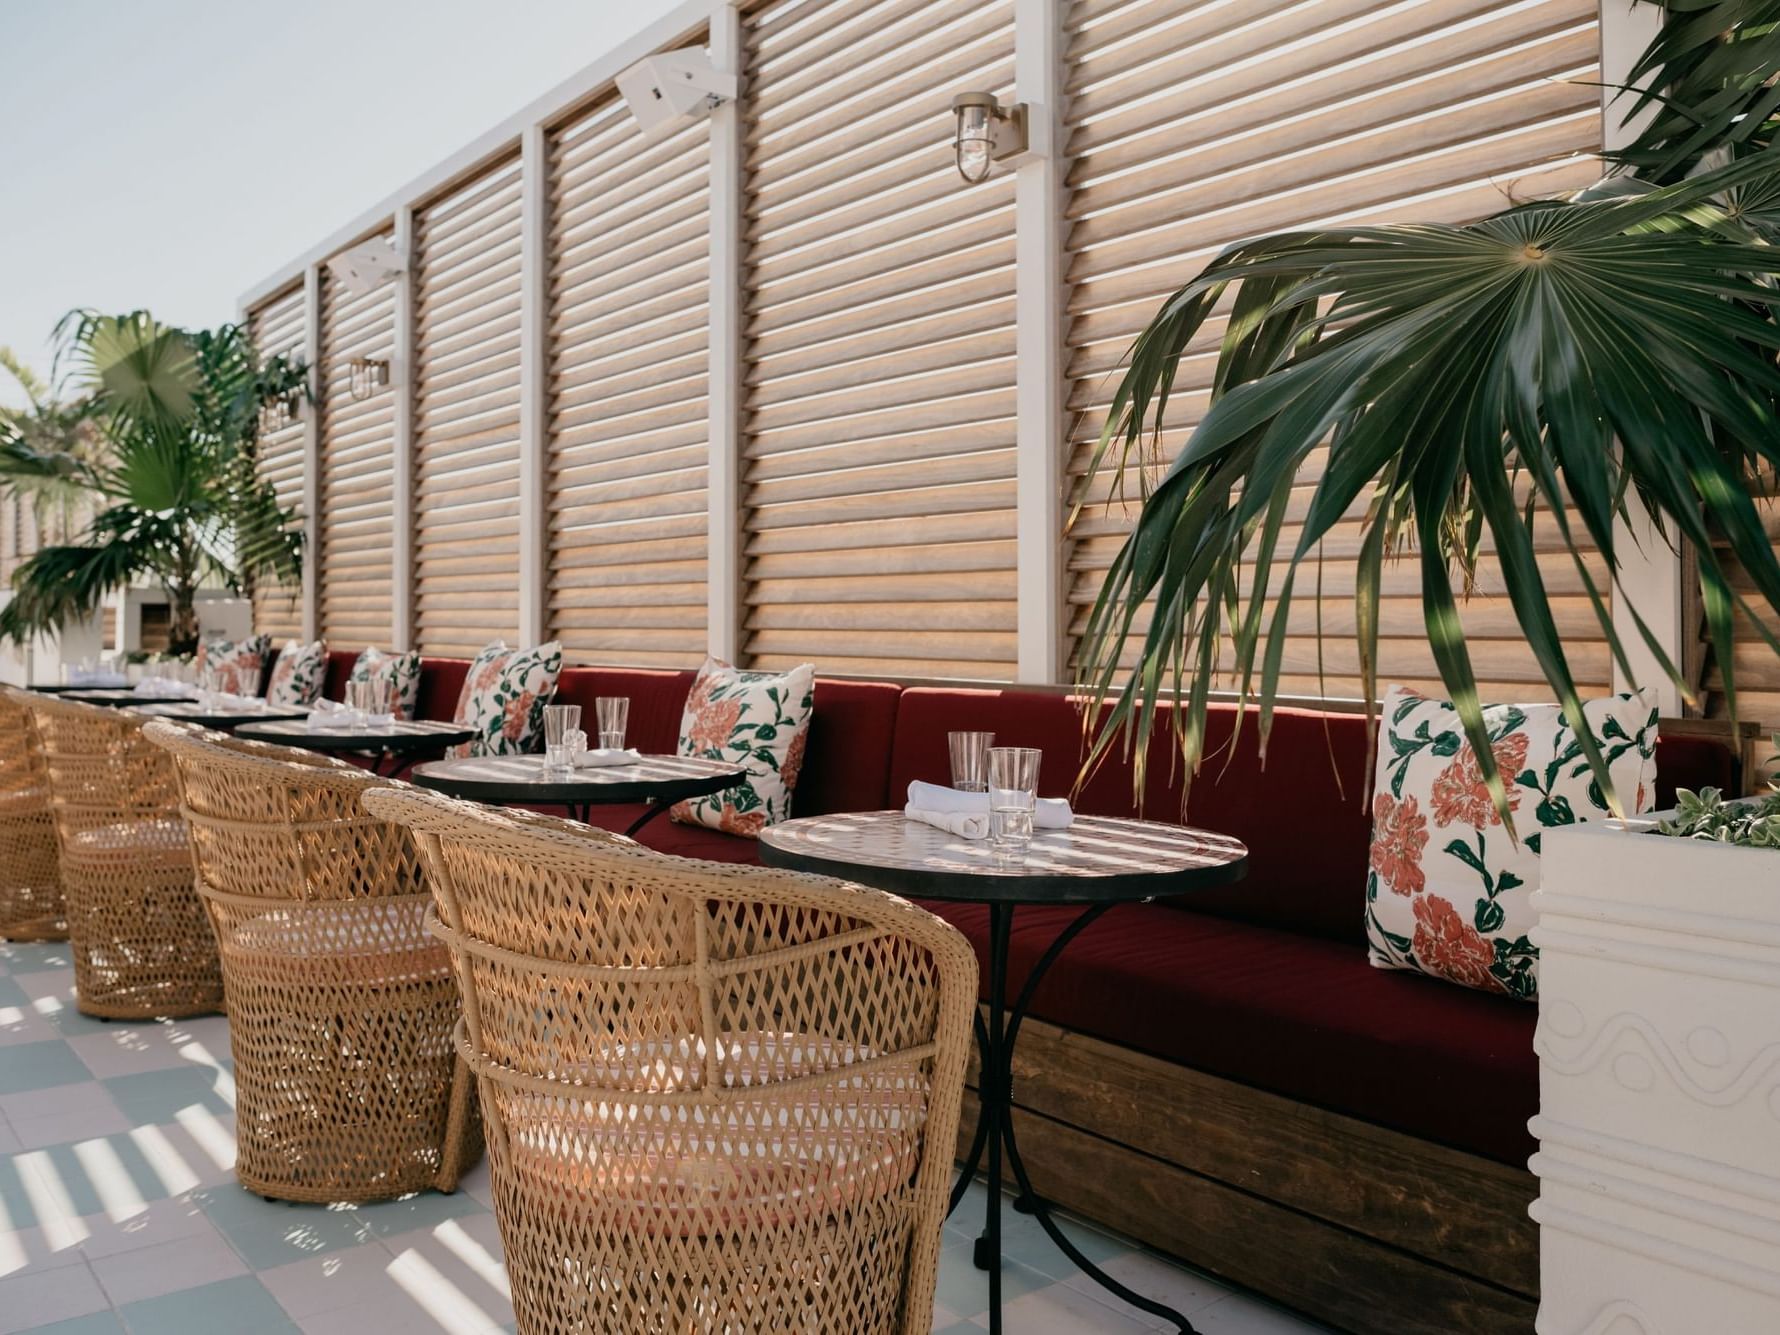 Outdoor dining set-up in The Roof Restaurant at Esme Beach